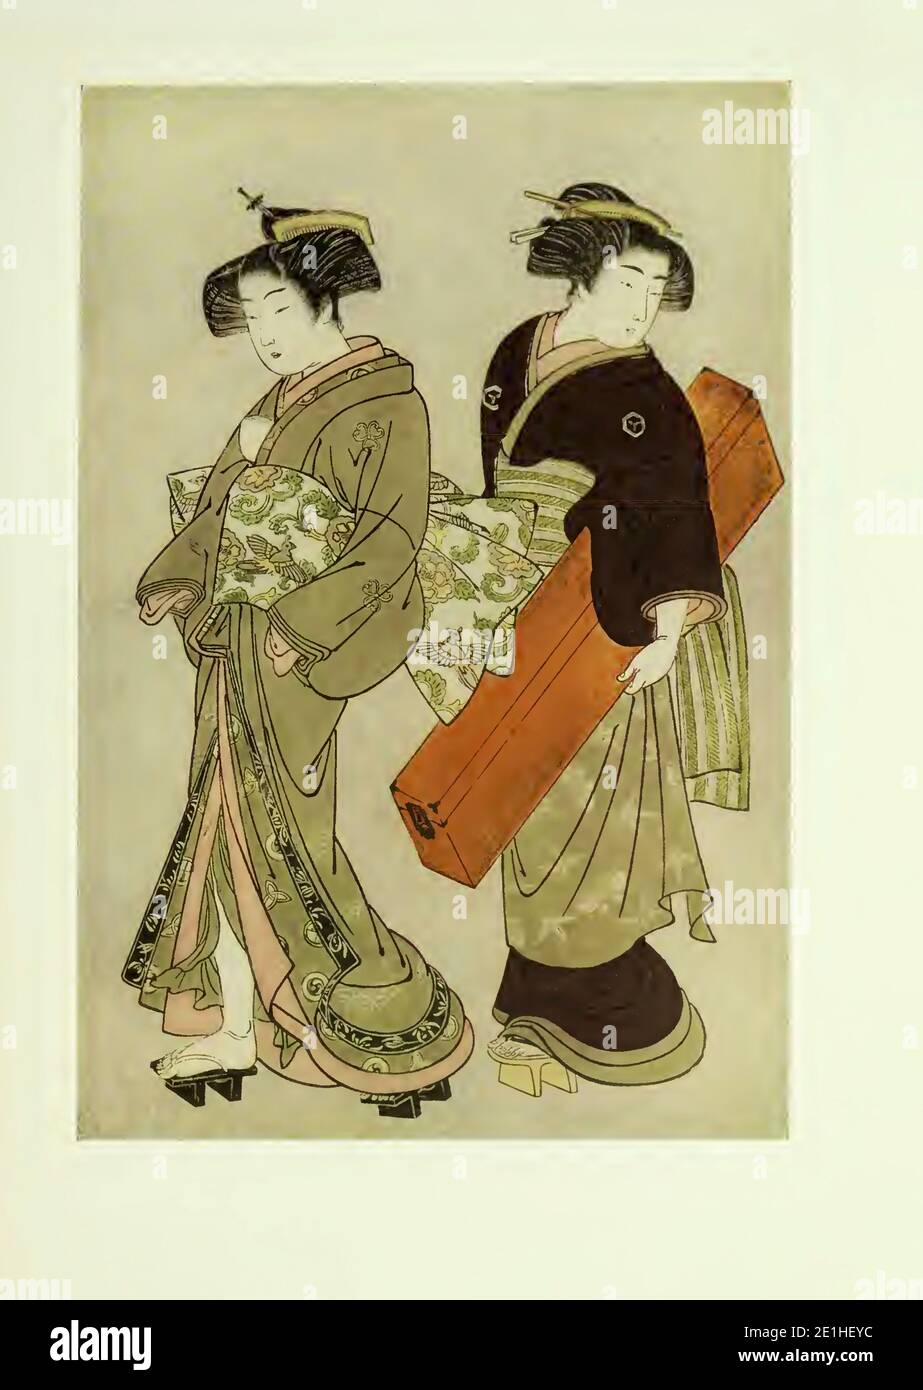 Shigemasa A Geisha and her Maid on her way to fulfil an engagement. Stock Photo